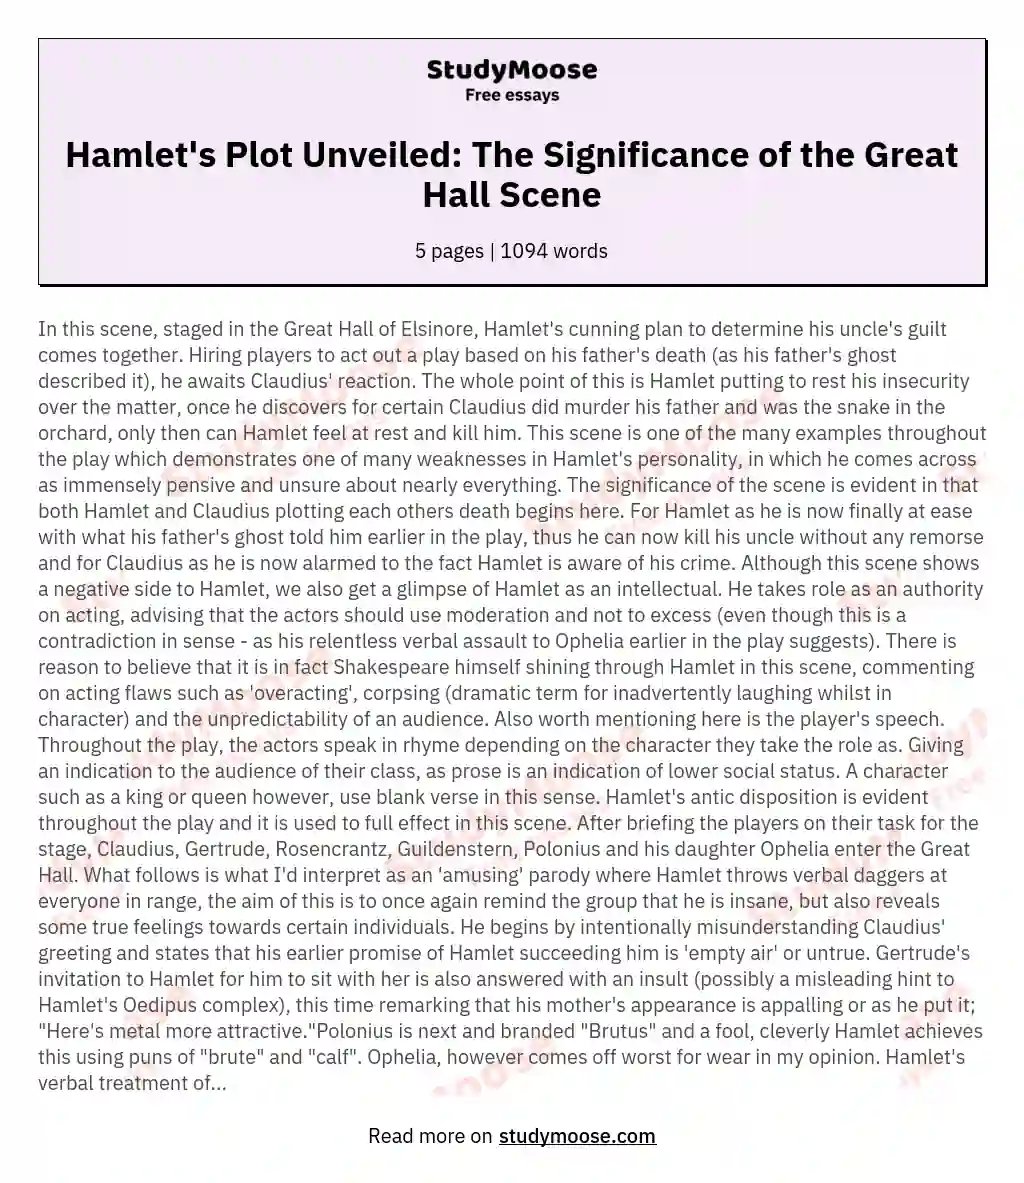 Hamlet's Plot Unveiled: The Significance of the Great Hall Scene essay